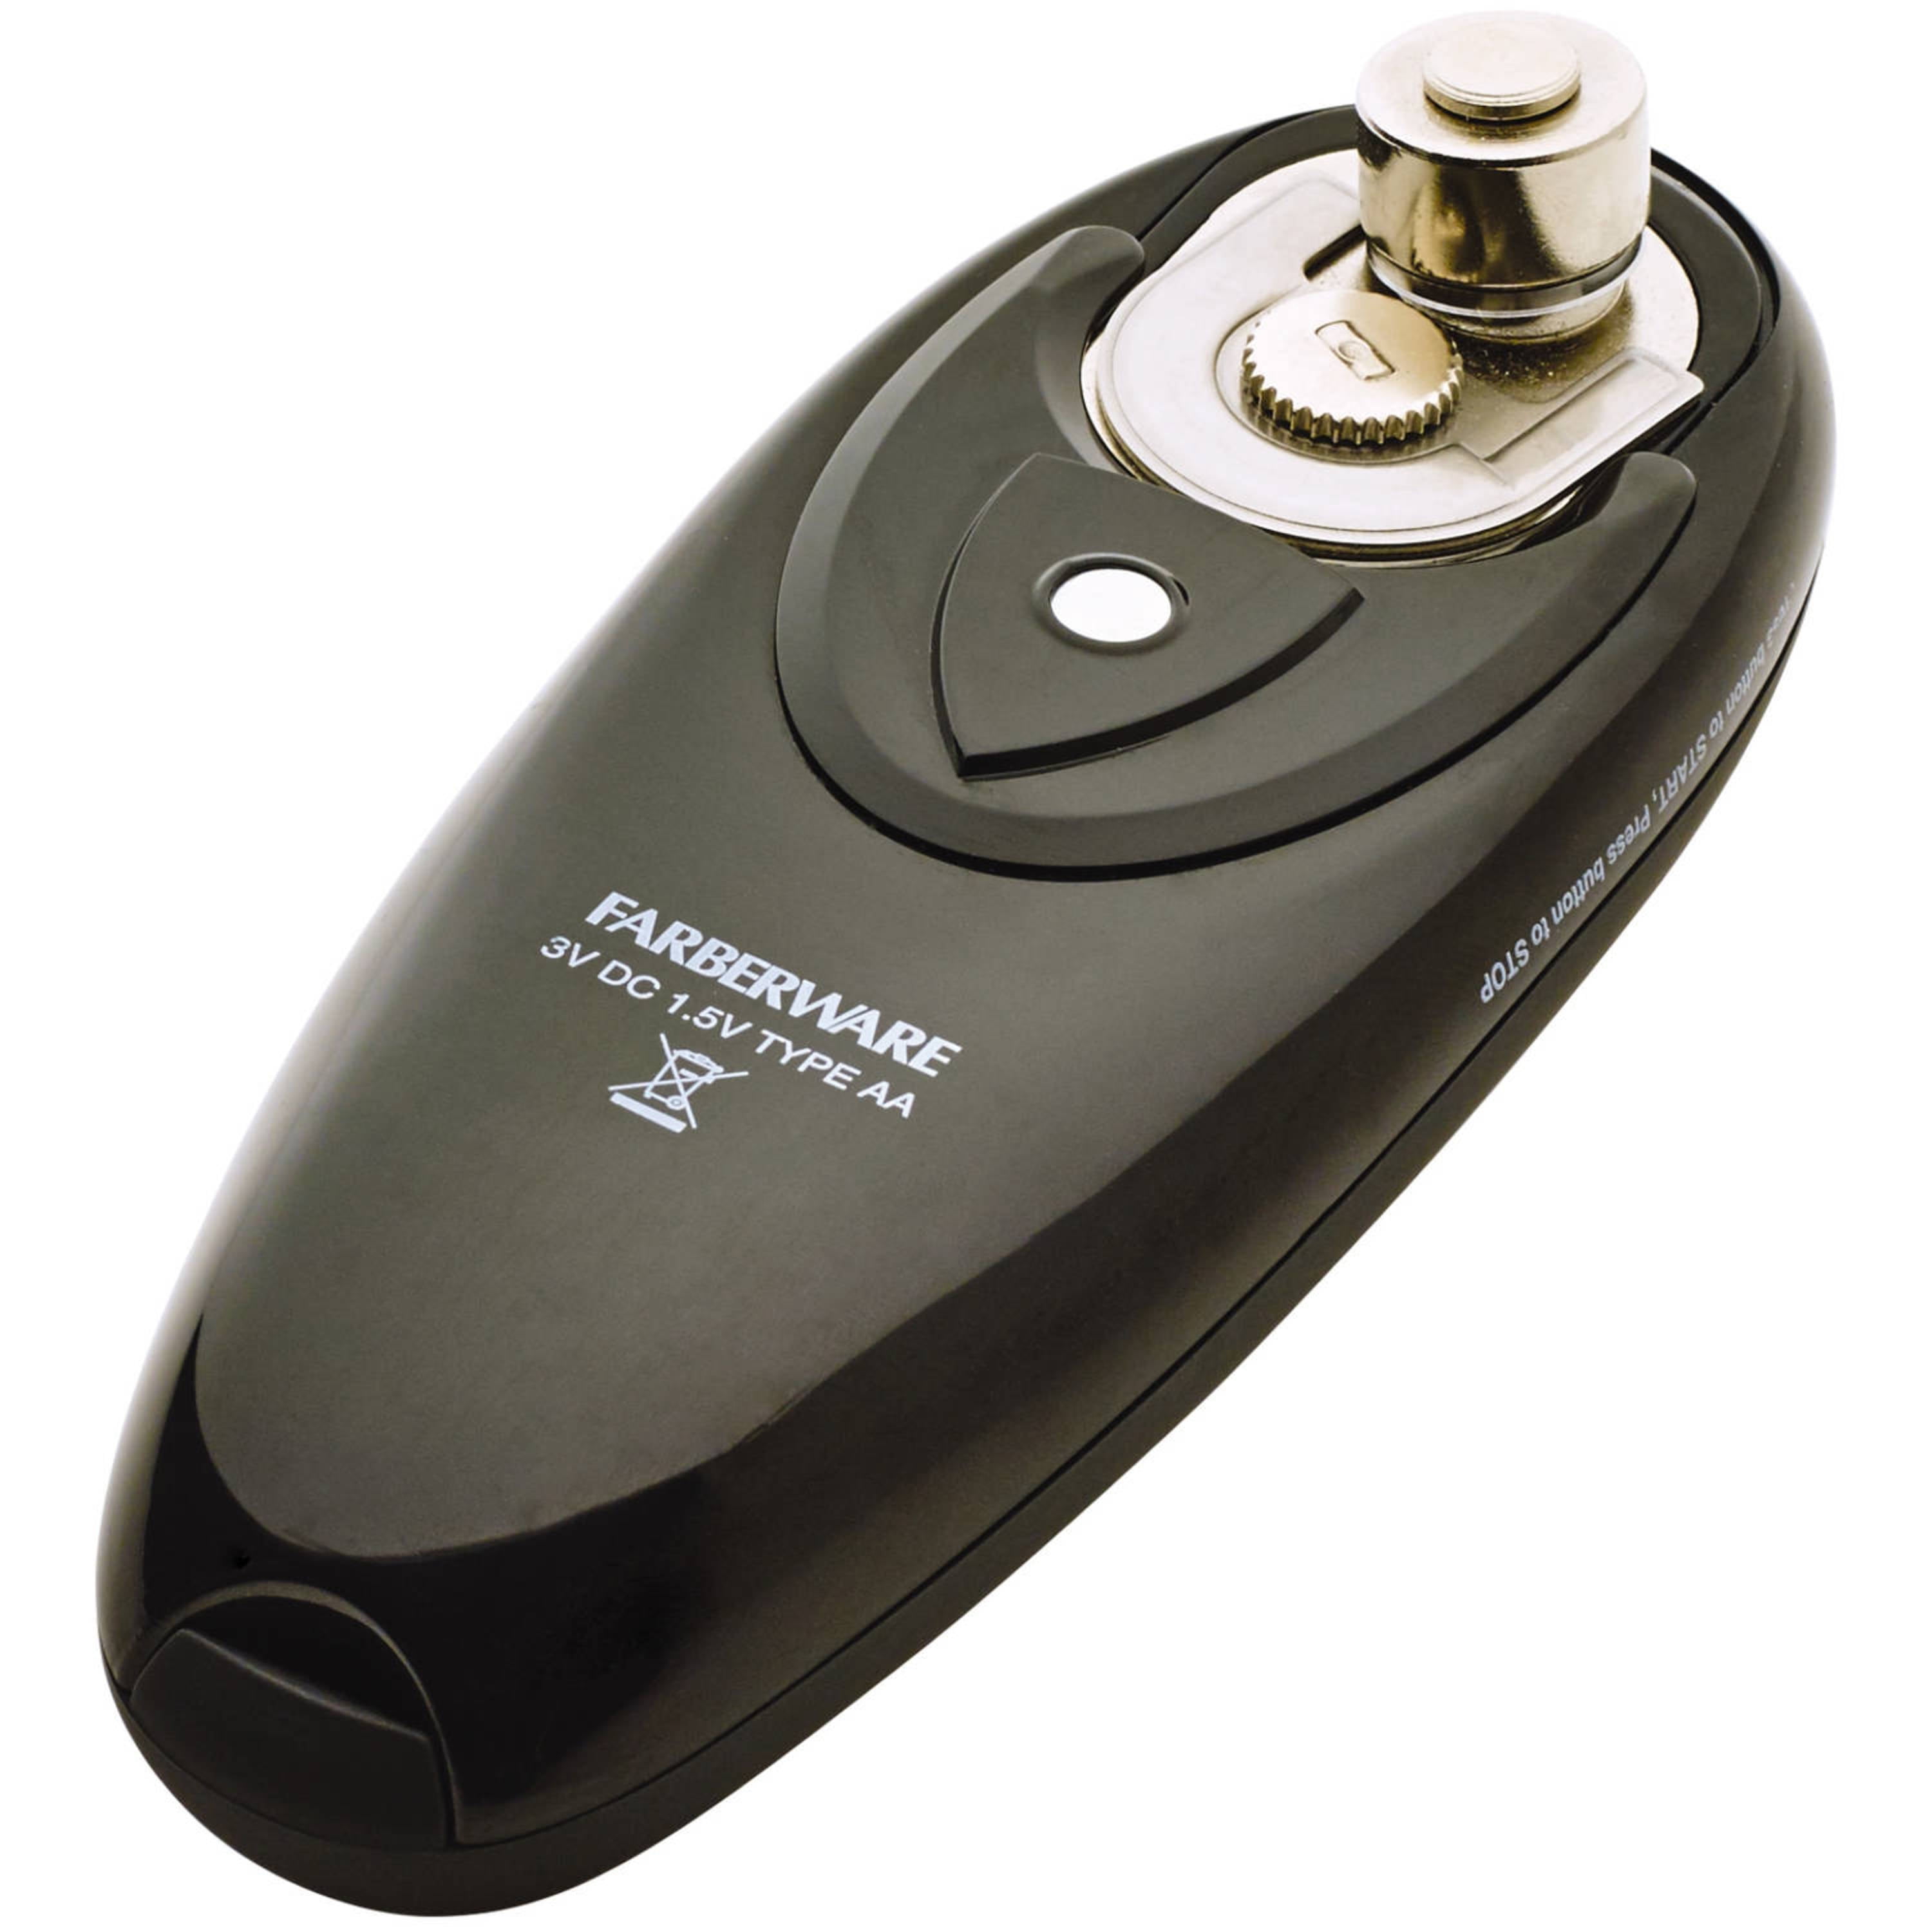  Farberware Hands-Free Automatic Can Opener : Home